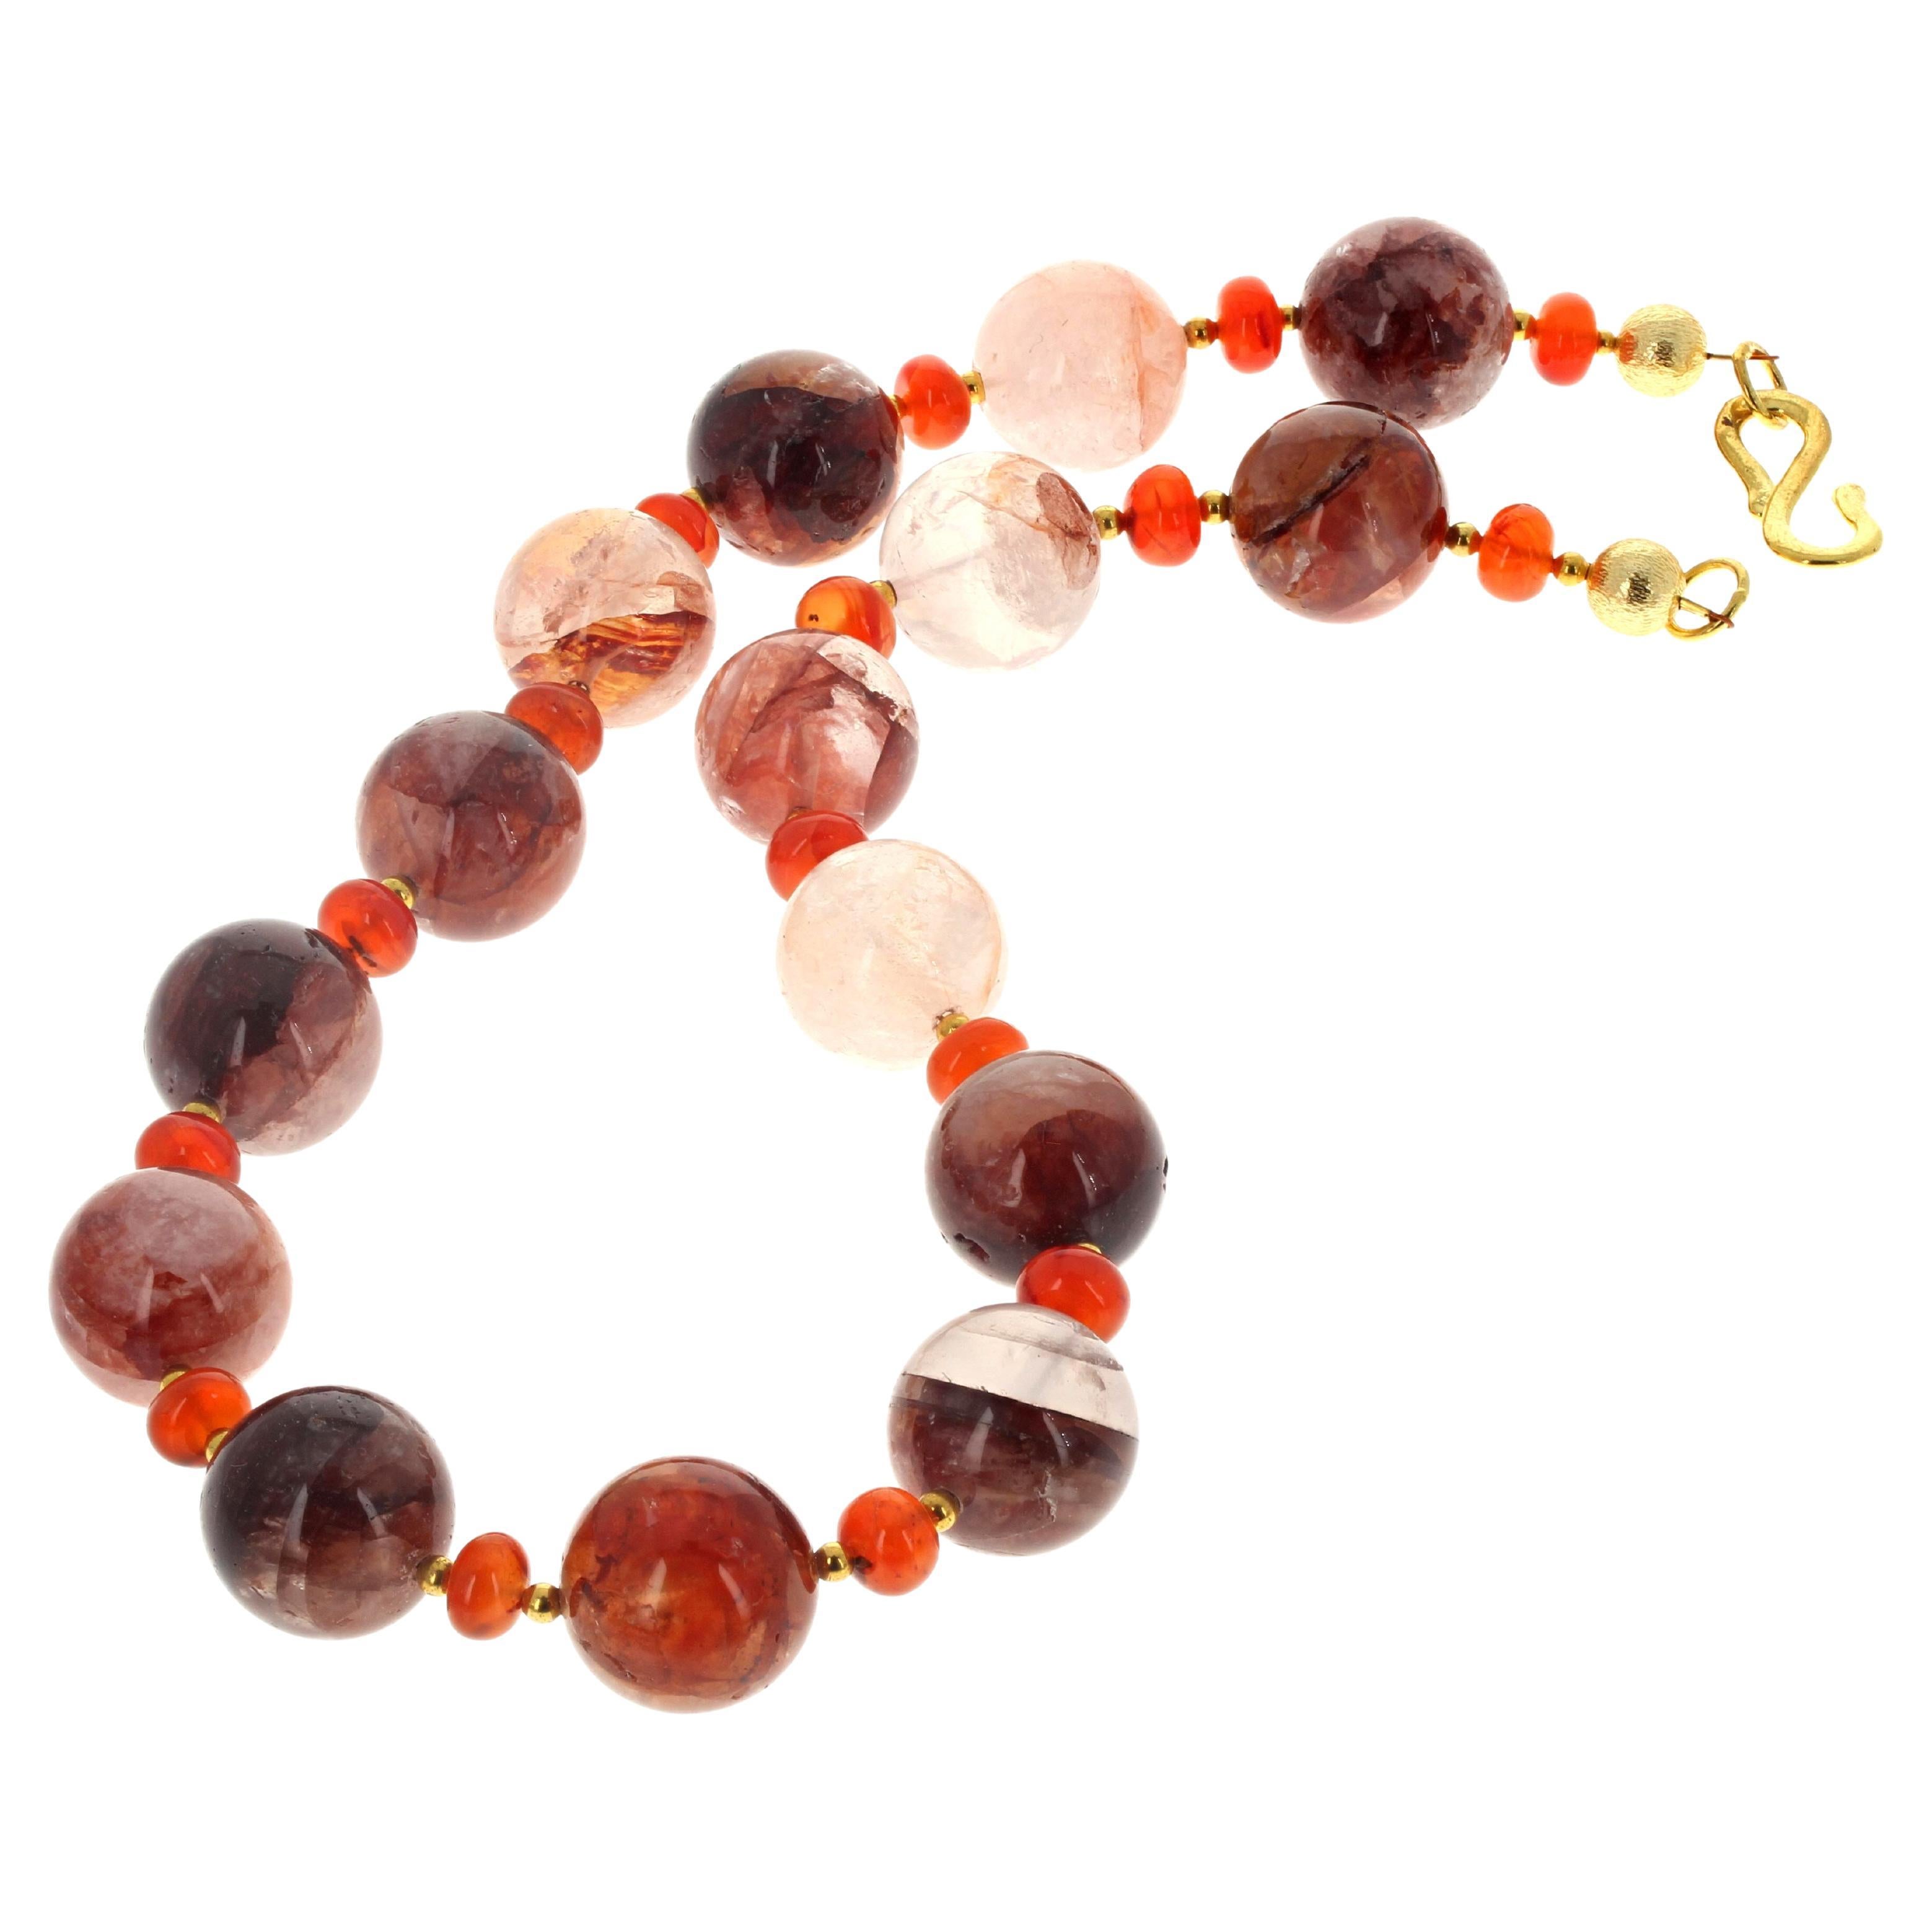 This lovely 19 inch long necklace is composed of highly polished translucent glowing natural real Strawberry Quartz (approximately 18mm) enhanced with highly polished glowing natural real Carnelian rondels (approximately 8mm) and little goldy